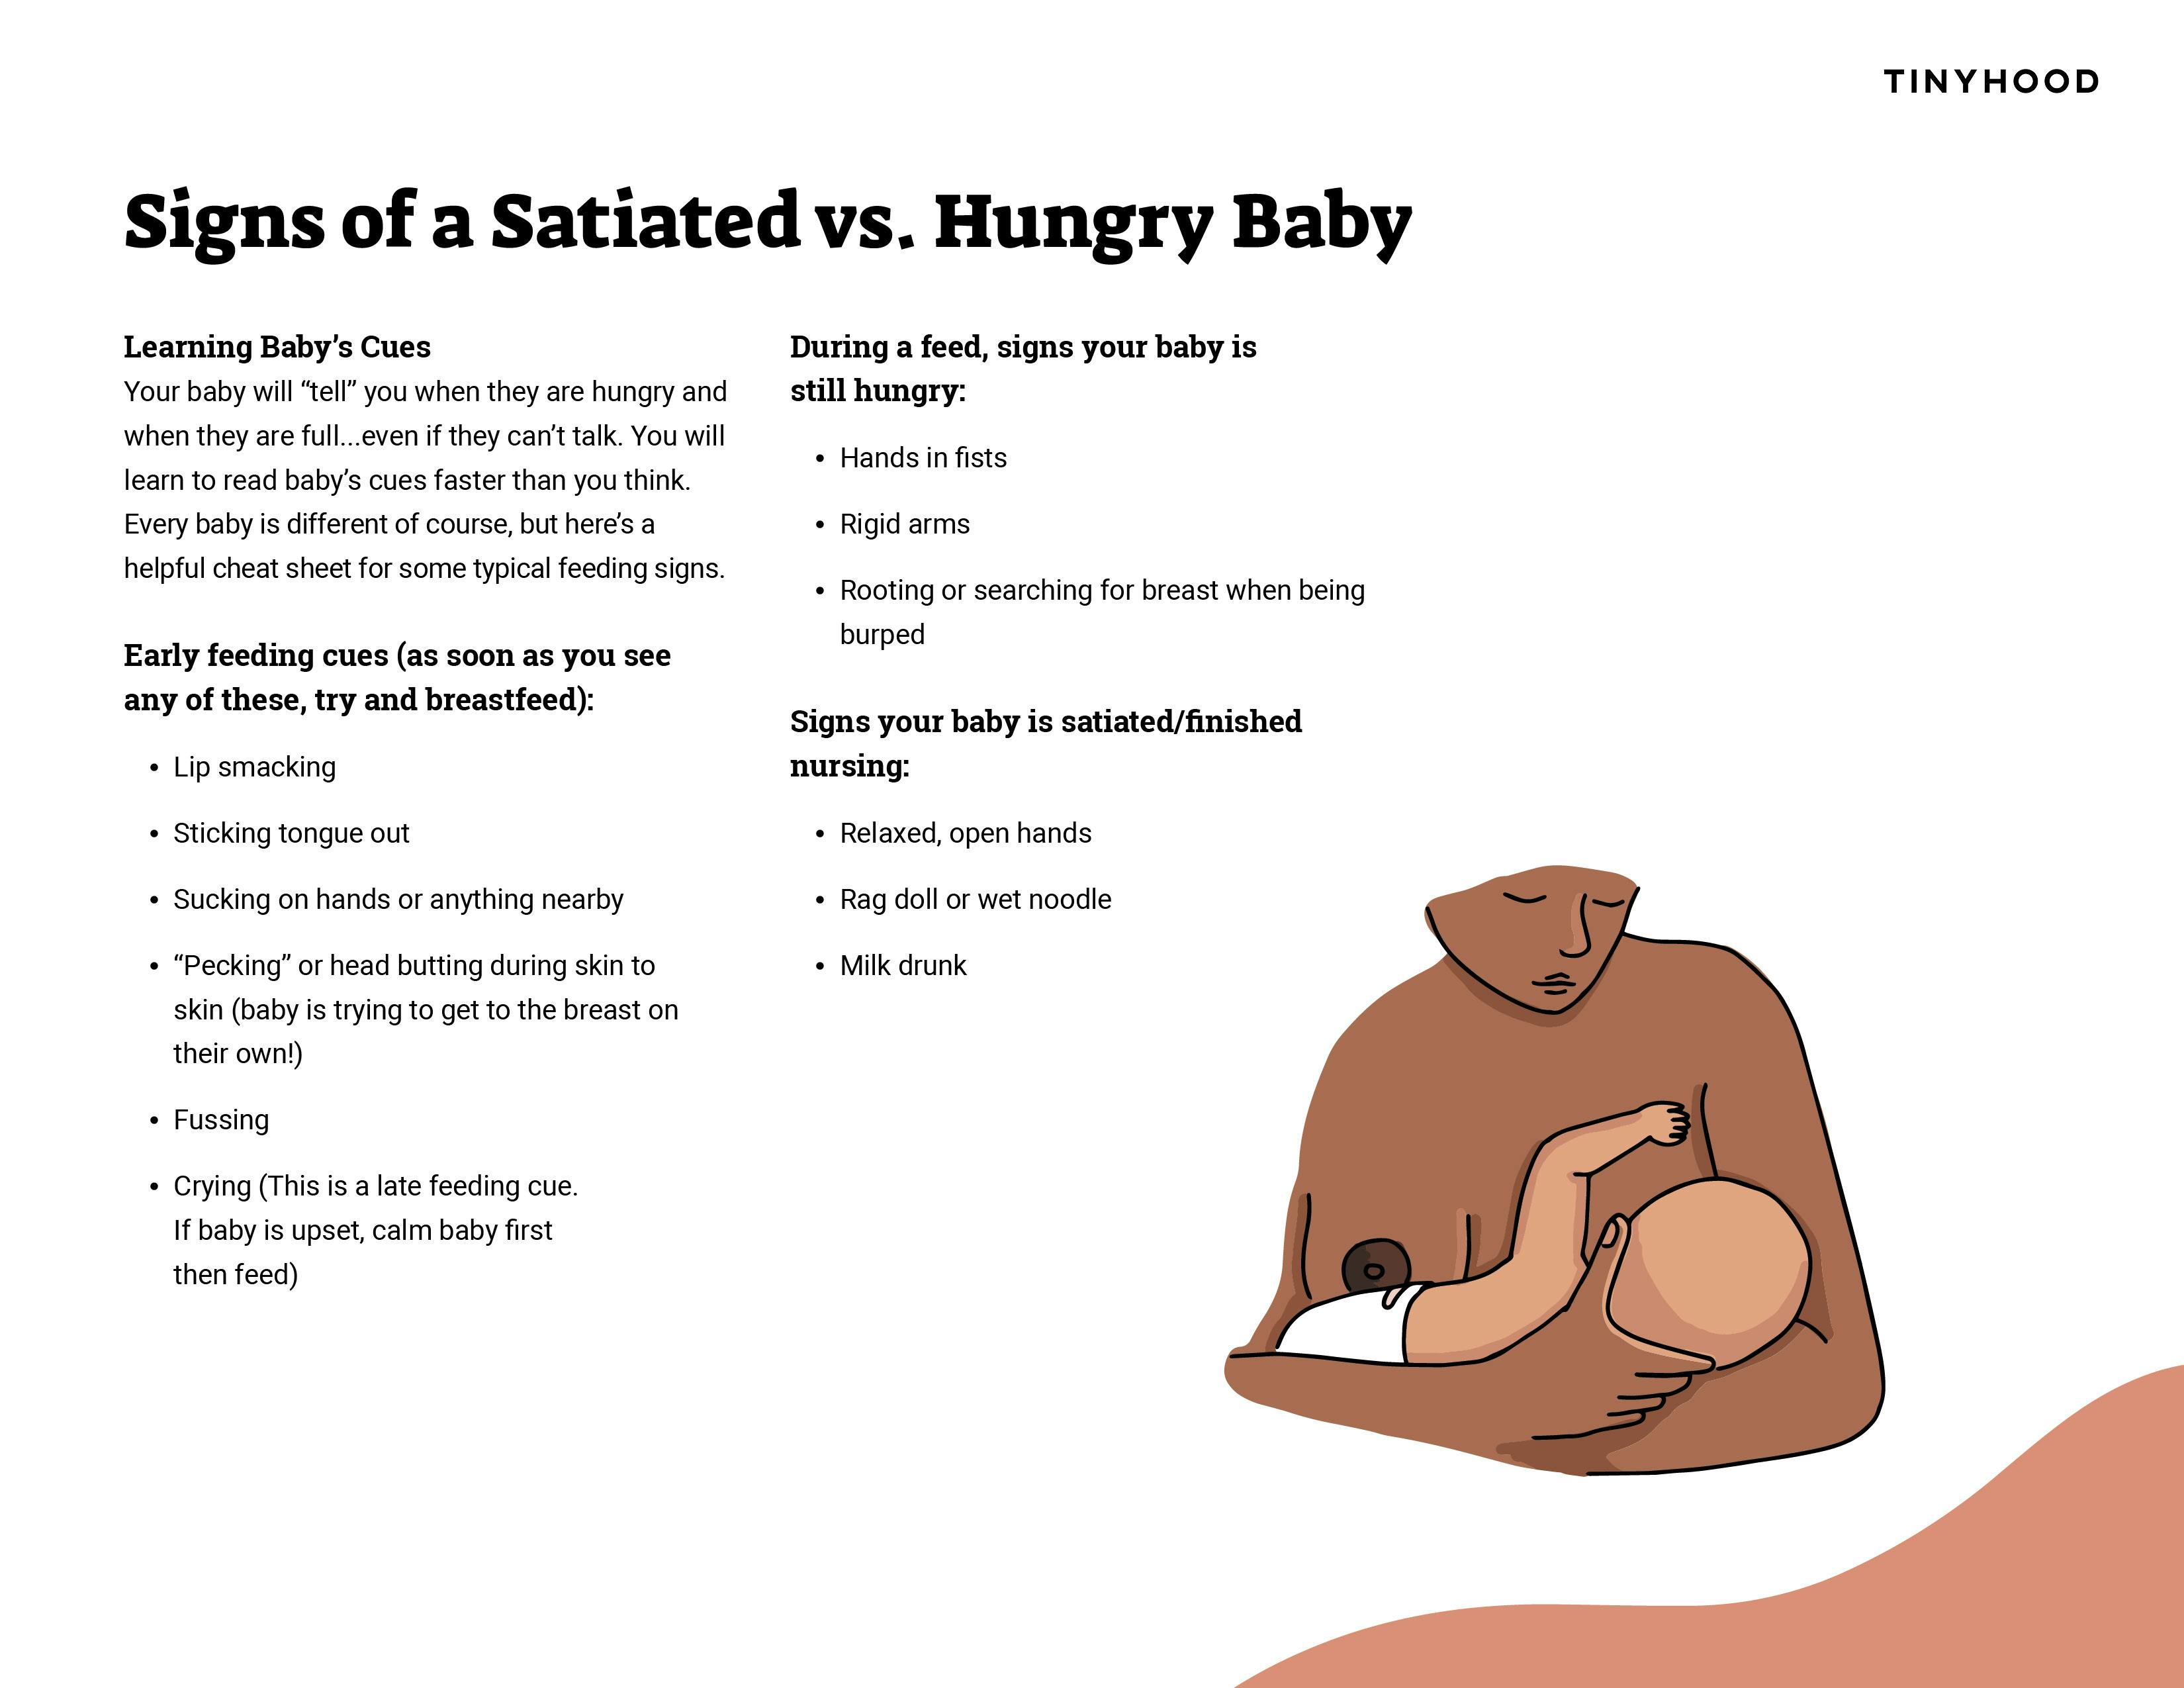 Preview image of Handout: Signs of a Satiated vs Hungry Baby